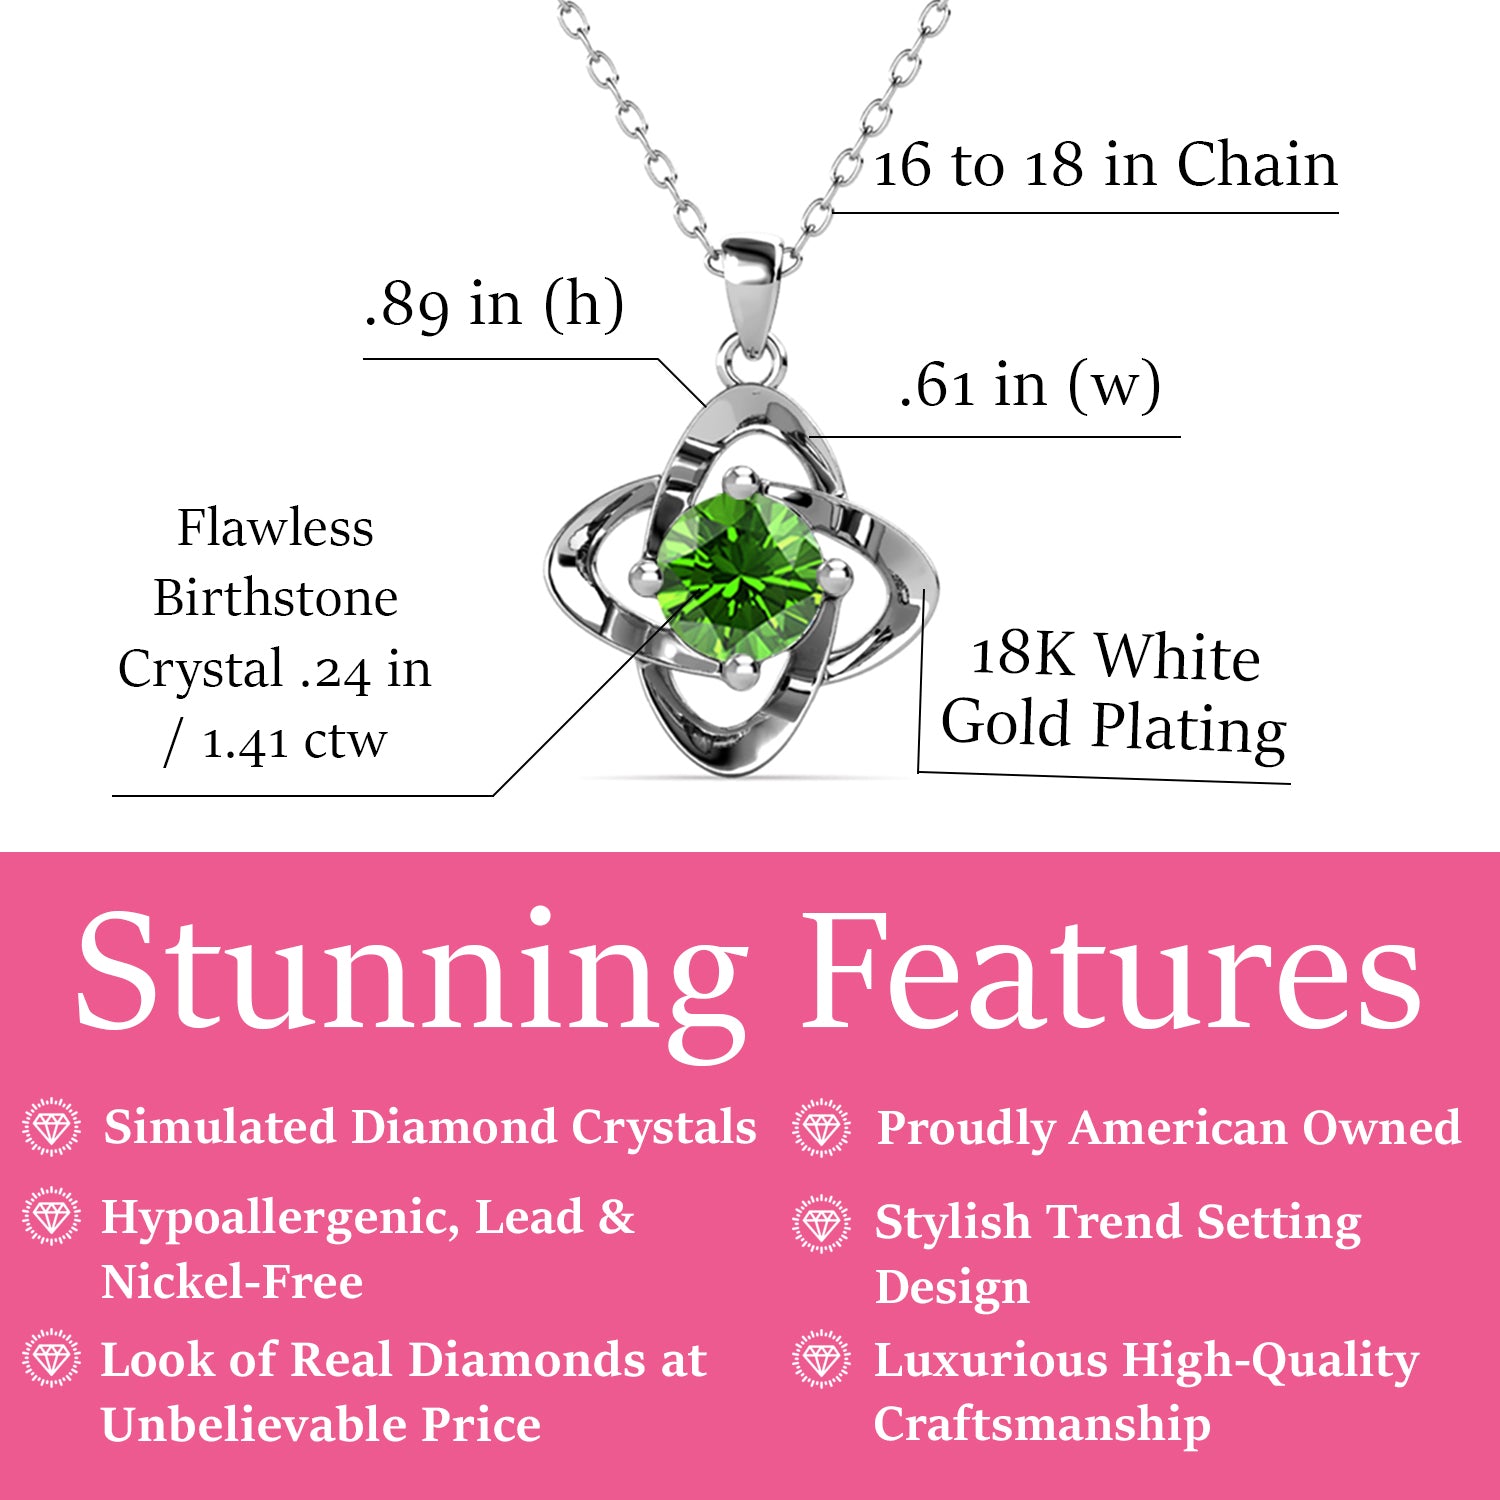 Infinity August Birthstone Peridot Necklace, 18k White Gold Plated Silver Birthstone Crystal Necklace